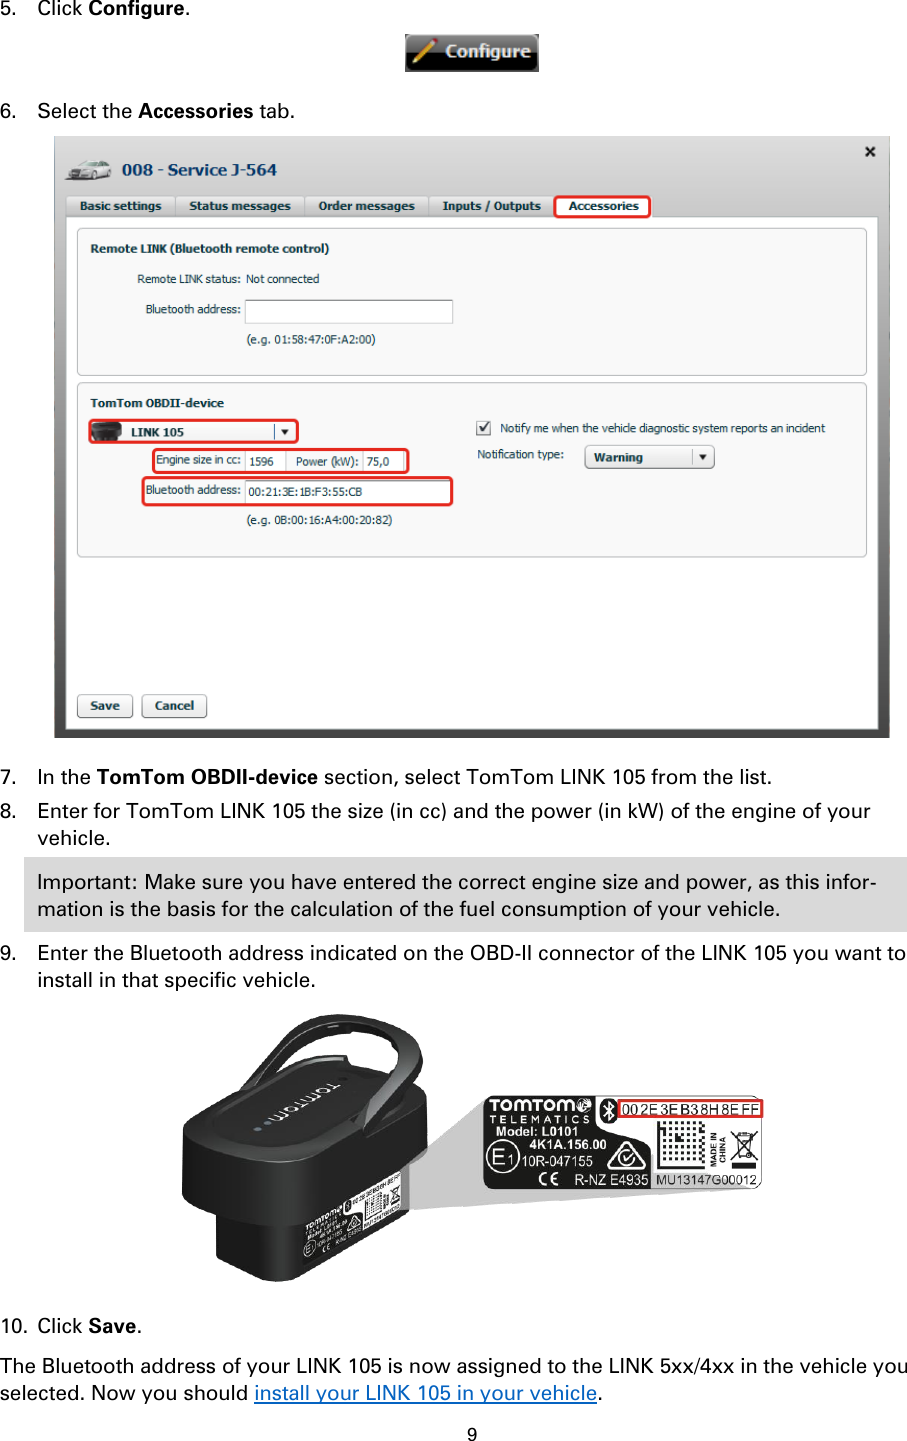 9    5. Click Configure.  6. Select the Accessories tab.  7. In the TomTom OBDII-device section, select TomTom LINK 105 from the list. 8. Enter for TomTom LINK 105 the size (in cc) and the power (in kW) of the engine of your vehicle. Important: Make sure you have entered the correct engine size and power, as this infor-mation is the basis for the calculation of the fuel consumption of your vehicle. 9. Enter the Bluetooth address indicated on the OBD-II connector of the LINK 105 you want to install in that specific vehicle.  10. Click Save. The Bluetooth address of your LINK 105 is now assigned to the LINK 5xx/4xx in the vehicle you selected. Now you should install your LINK 105 in your vehicle.  